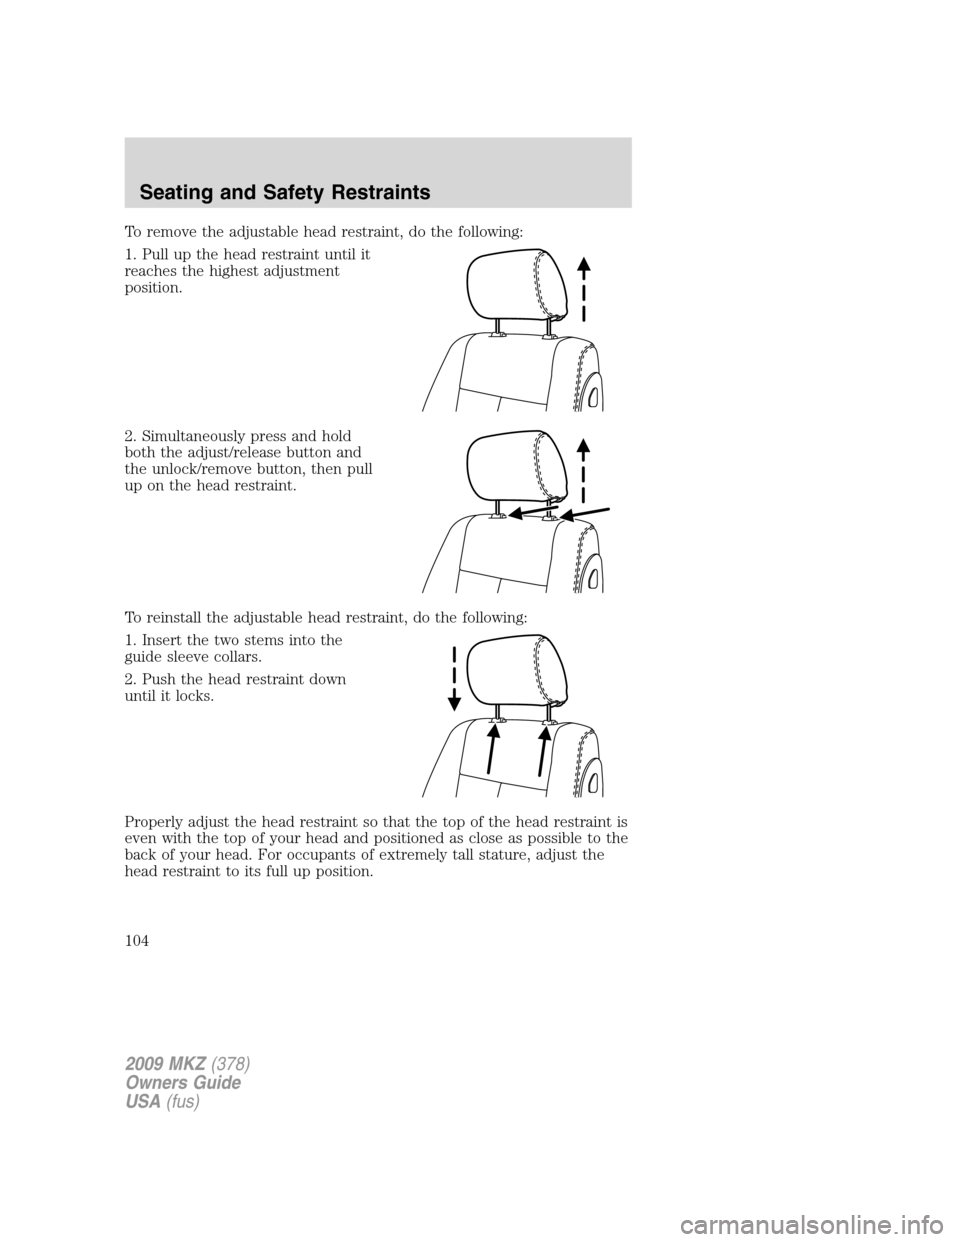 LINCOLN MKZ 2009  Owners Manual To remove the adjustable head restraint, do the following:
1. Pull up the head restraint until it
reaches the highest adjustment
position.
2. Simultaneously press and hold
both the adjust/release butt